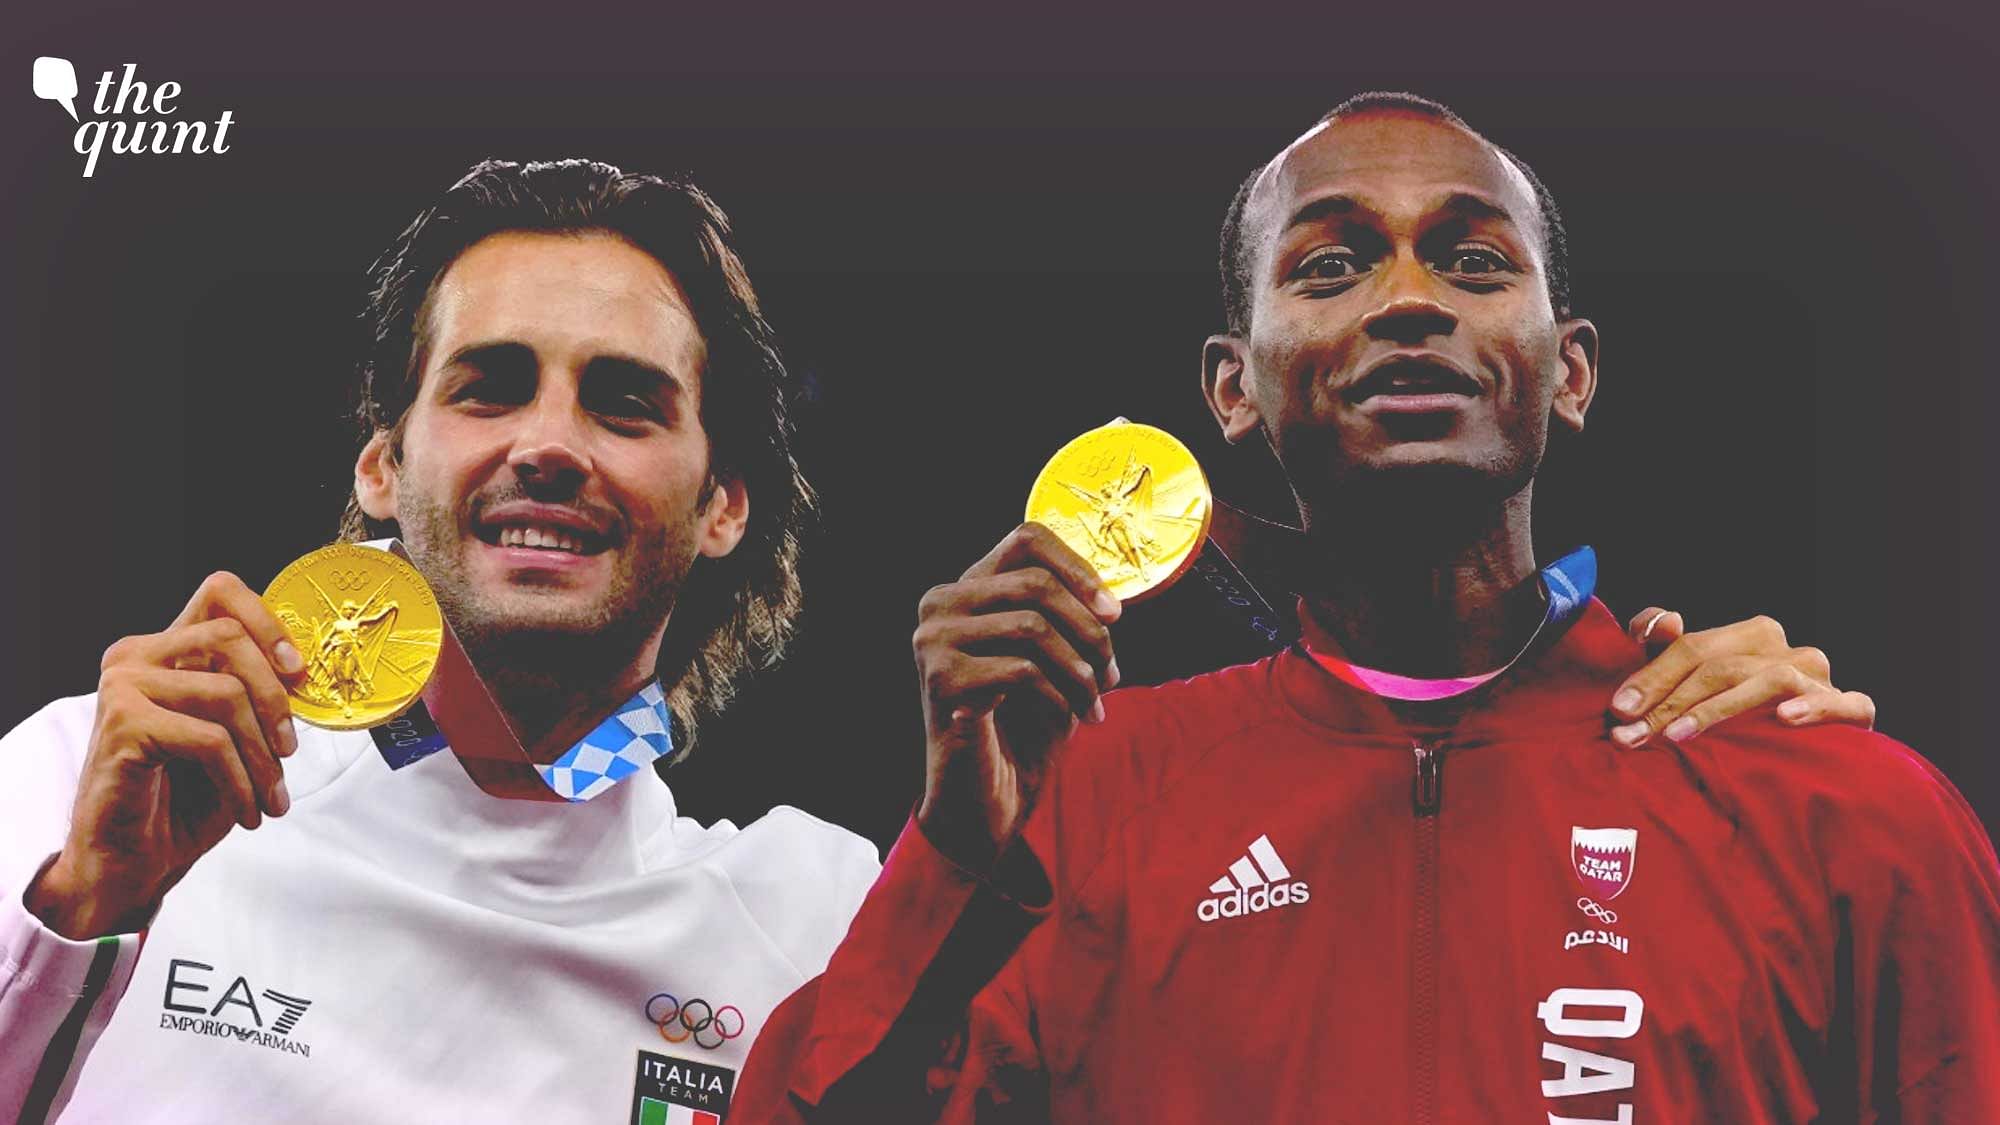 <div class="paragraphs"><p>Friends&nbsp;Mutaz Essa Barshim of Qatar and Gianmarco Tamberi of Italy chose to share the high jump gold medal.</p></div>